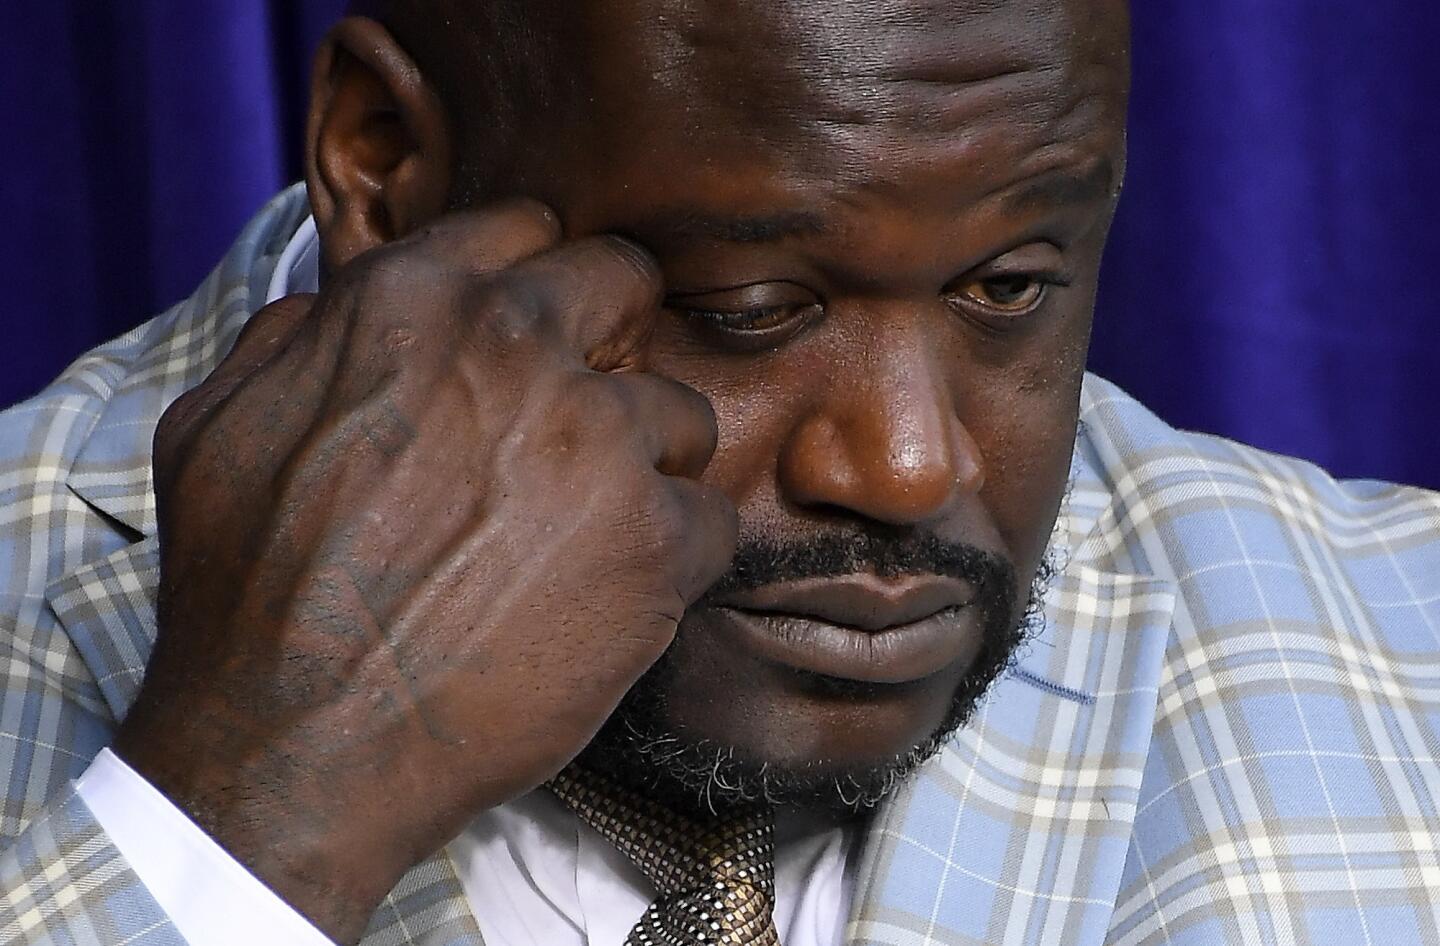 Shaquille O'Neal wipes tears from his eyes at the unveiling of a statue of him in front of Staples Center, Friday, March 24, 2017, in Los Angeles. (AP Photo/Mark J. Terrill)